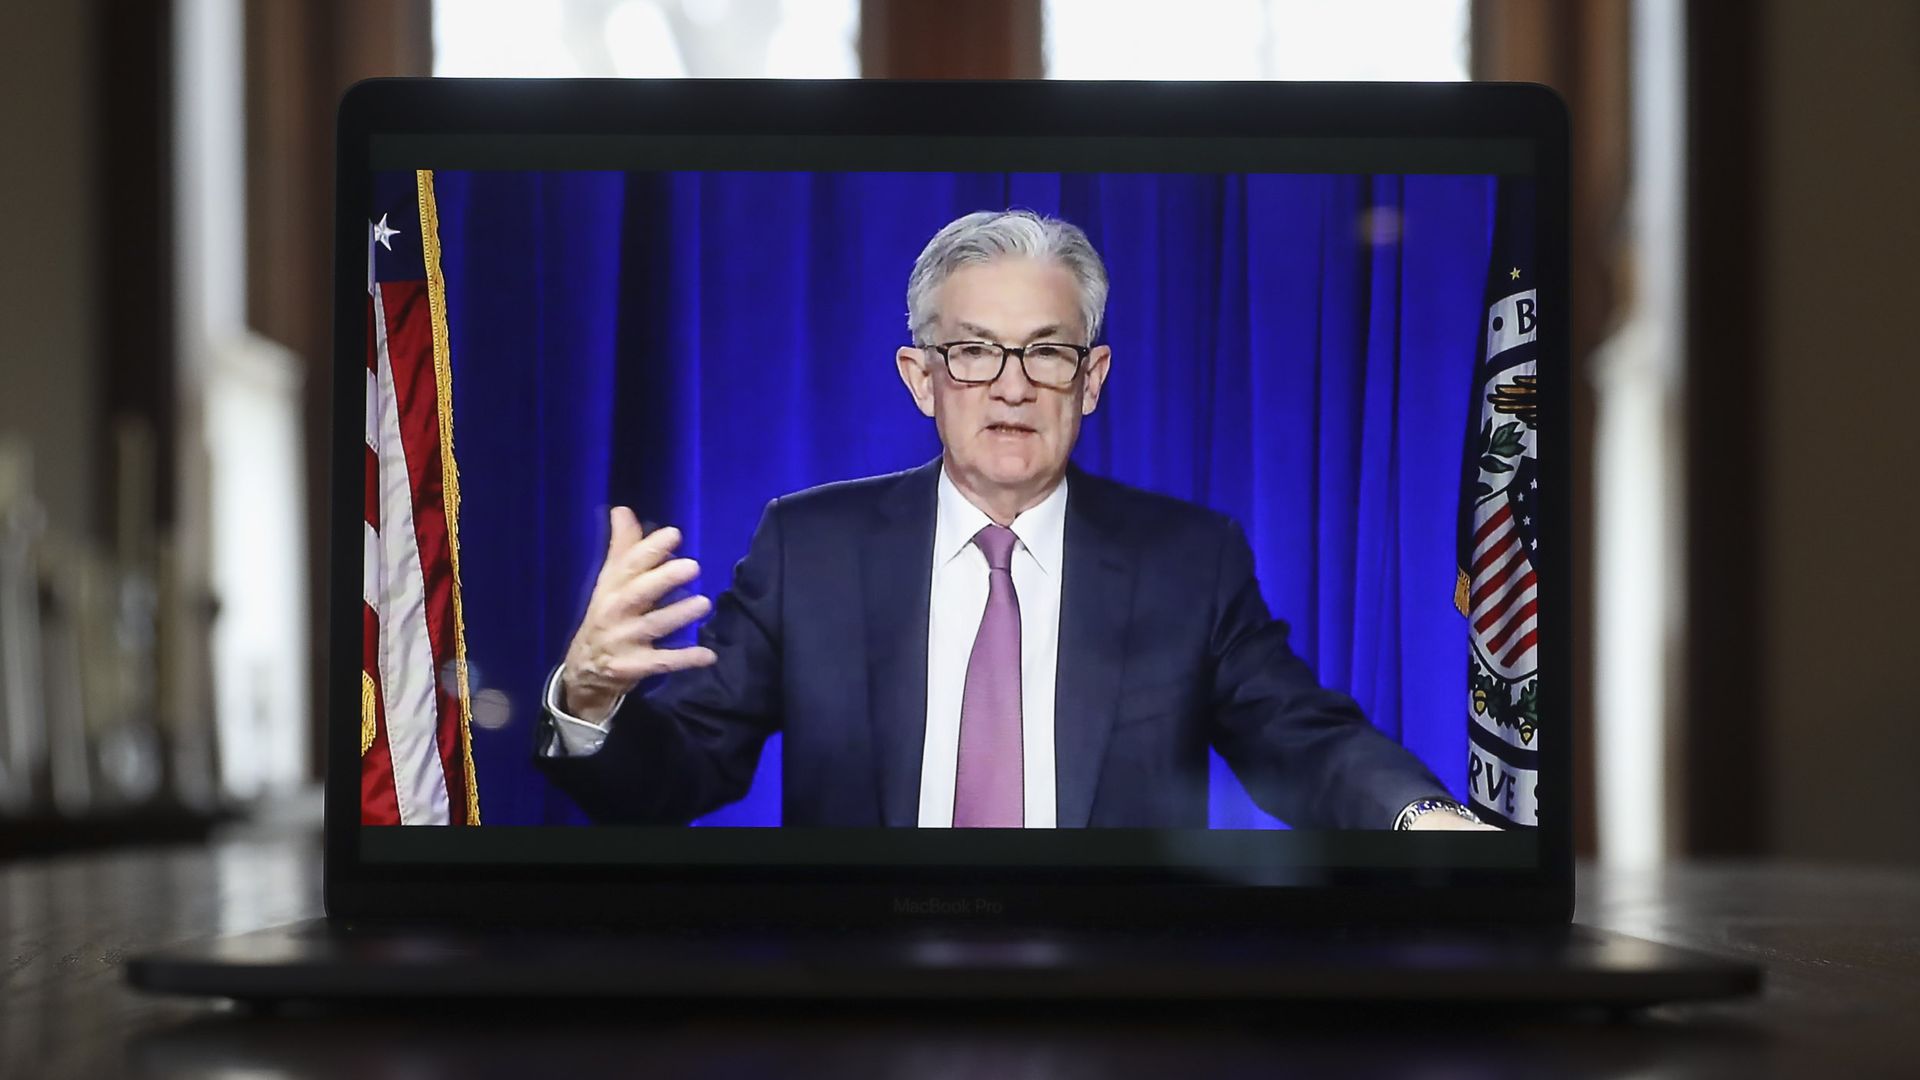 Fed chair Jerome Powell on a laptop